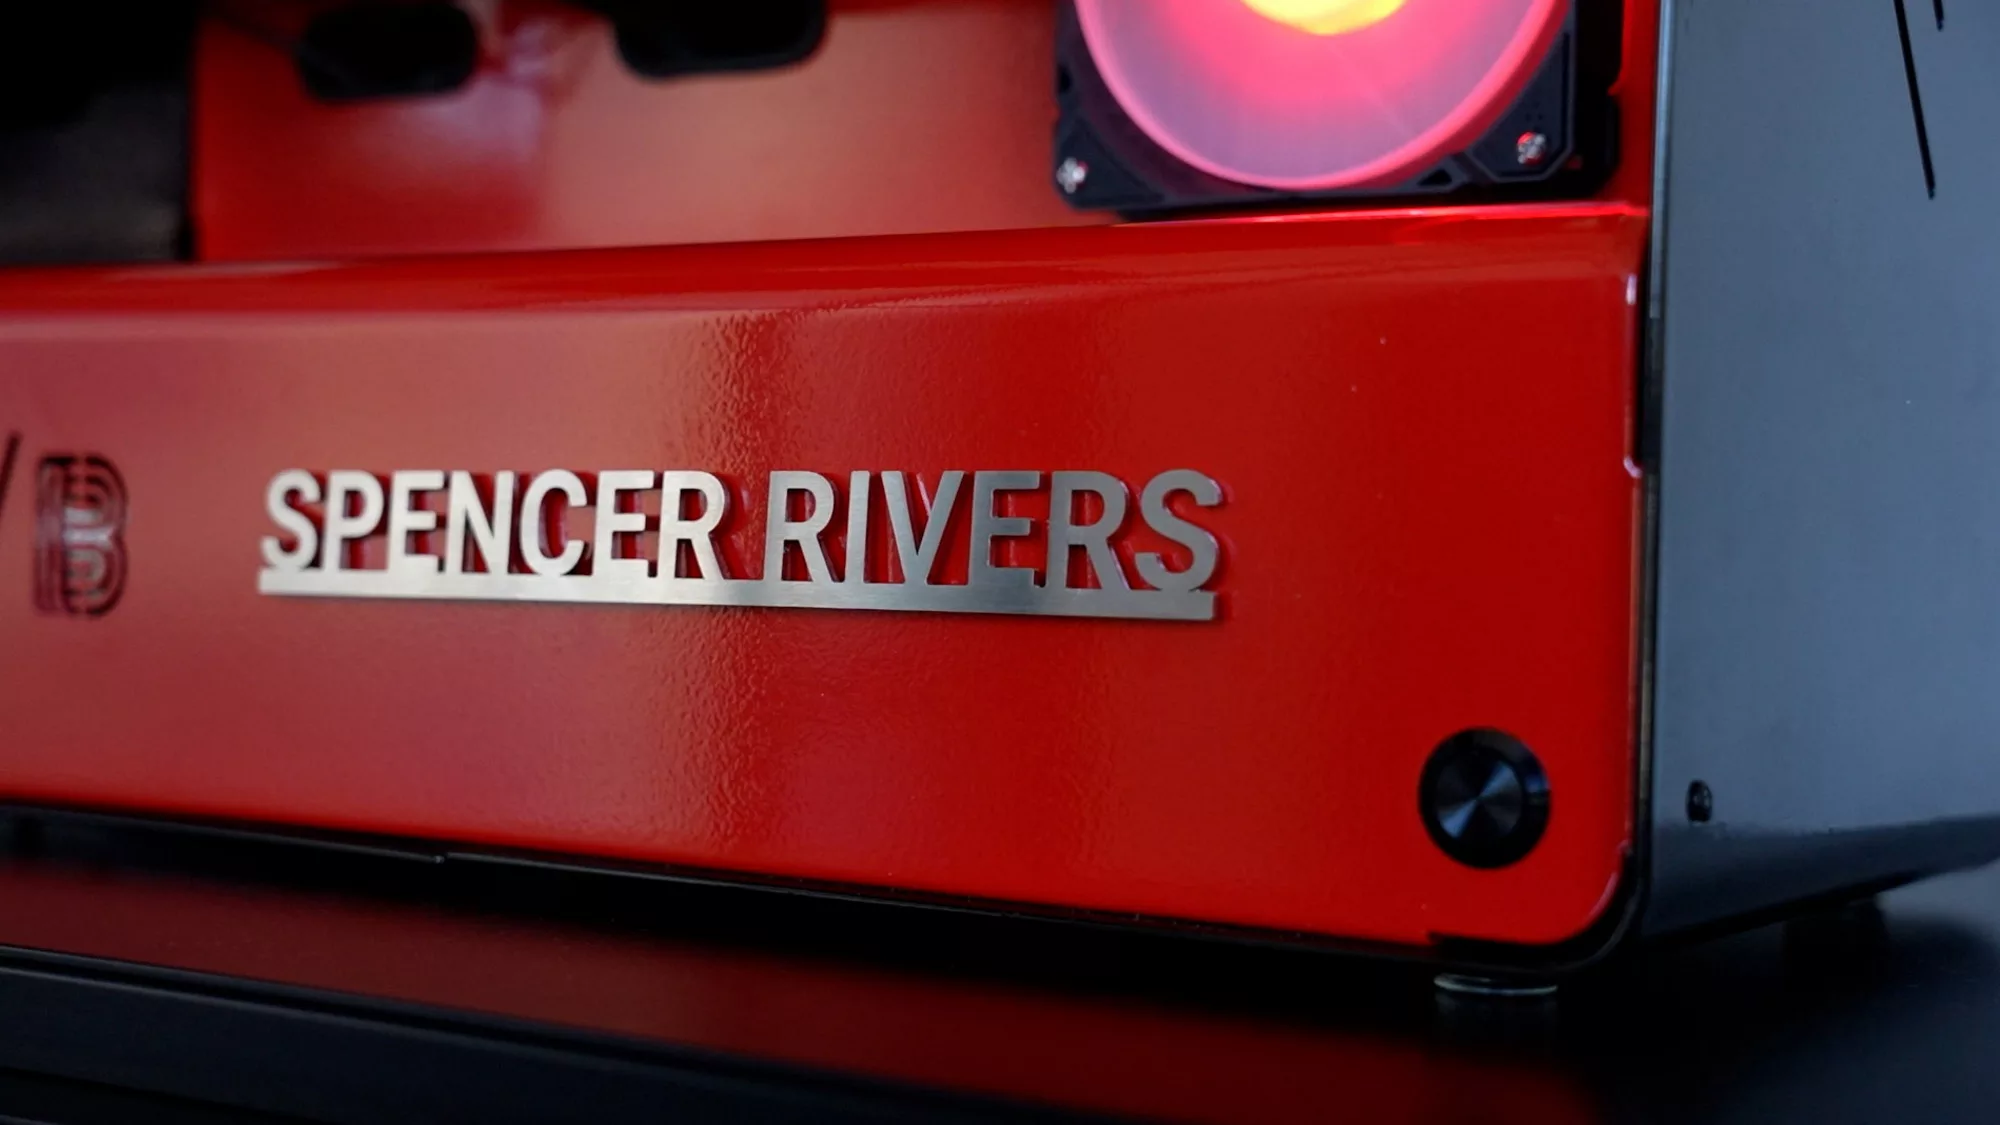 Closeup view of the custom nameplate for the Spencer Rivers PC build